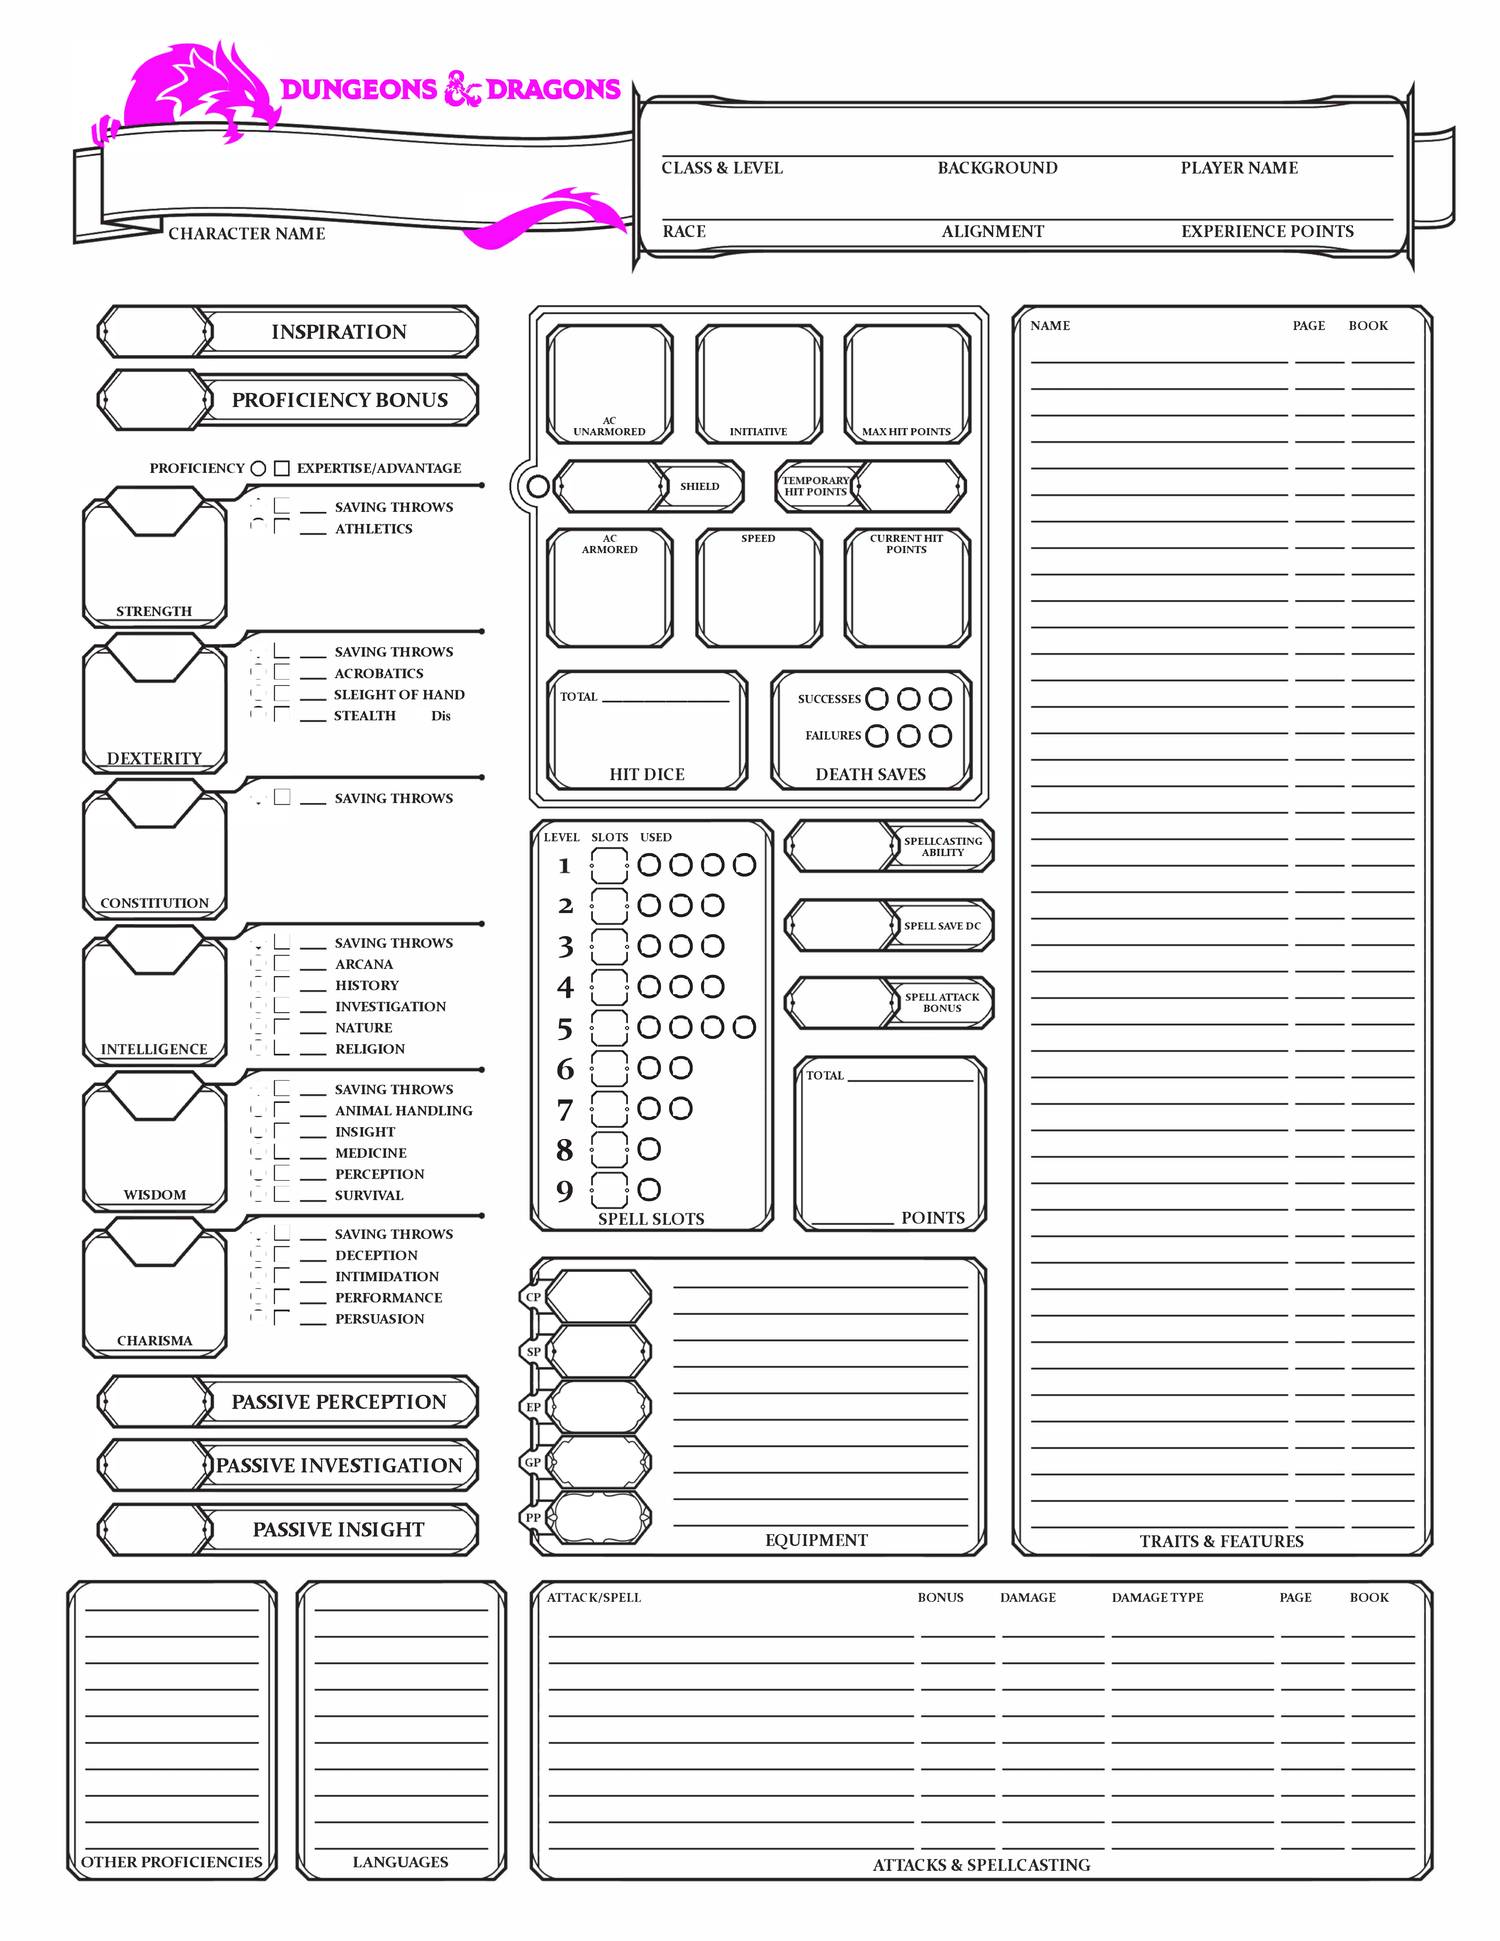 remastered character sheet - fillable.pdf | DocDroid